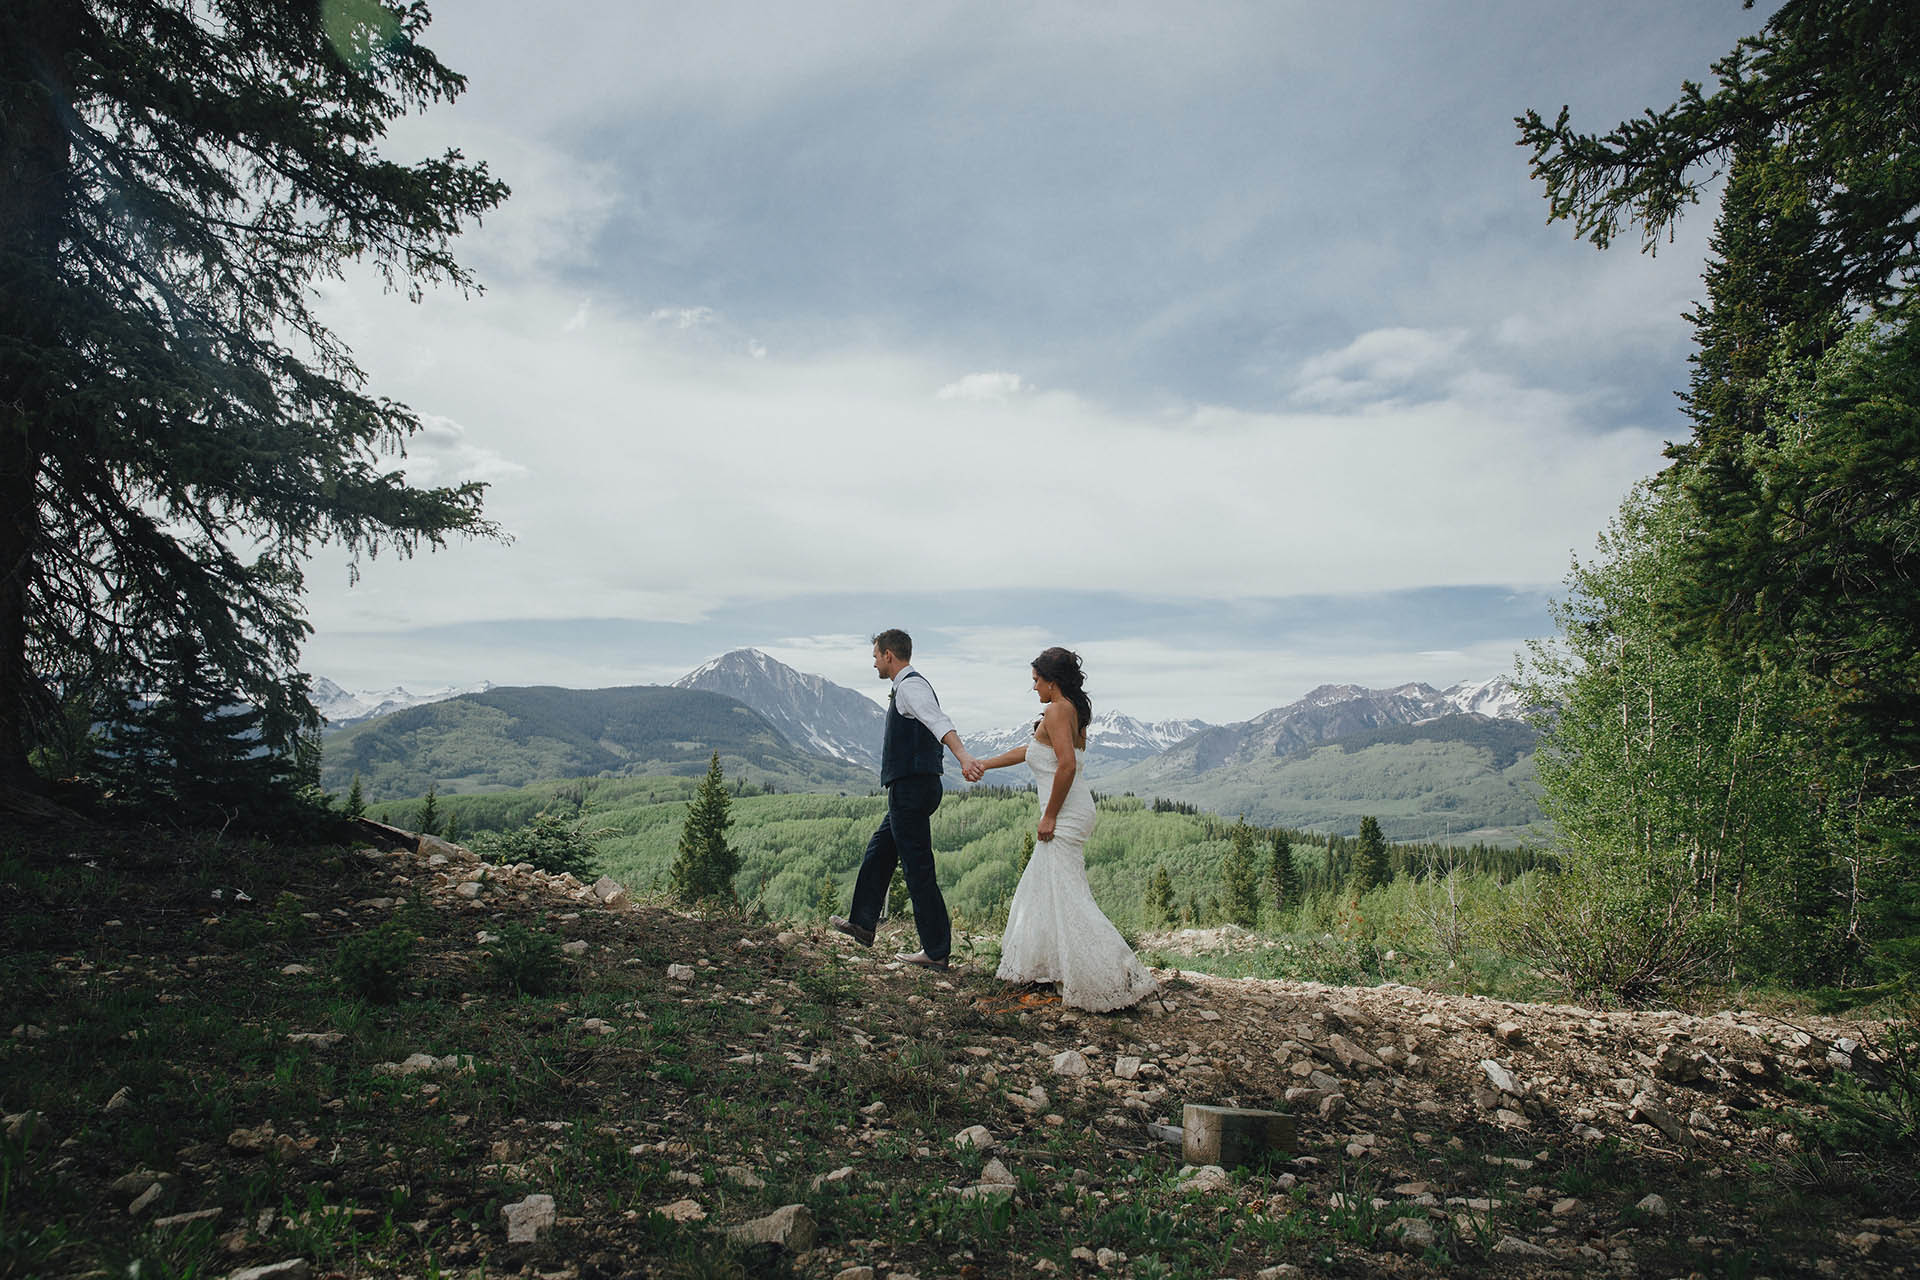 Crested Butte Elopement | GEOFF DUNCAN PHOTOGRAPHY